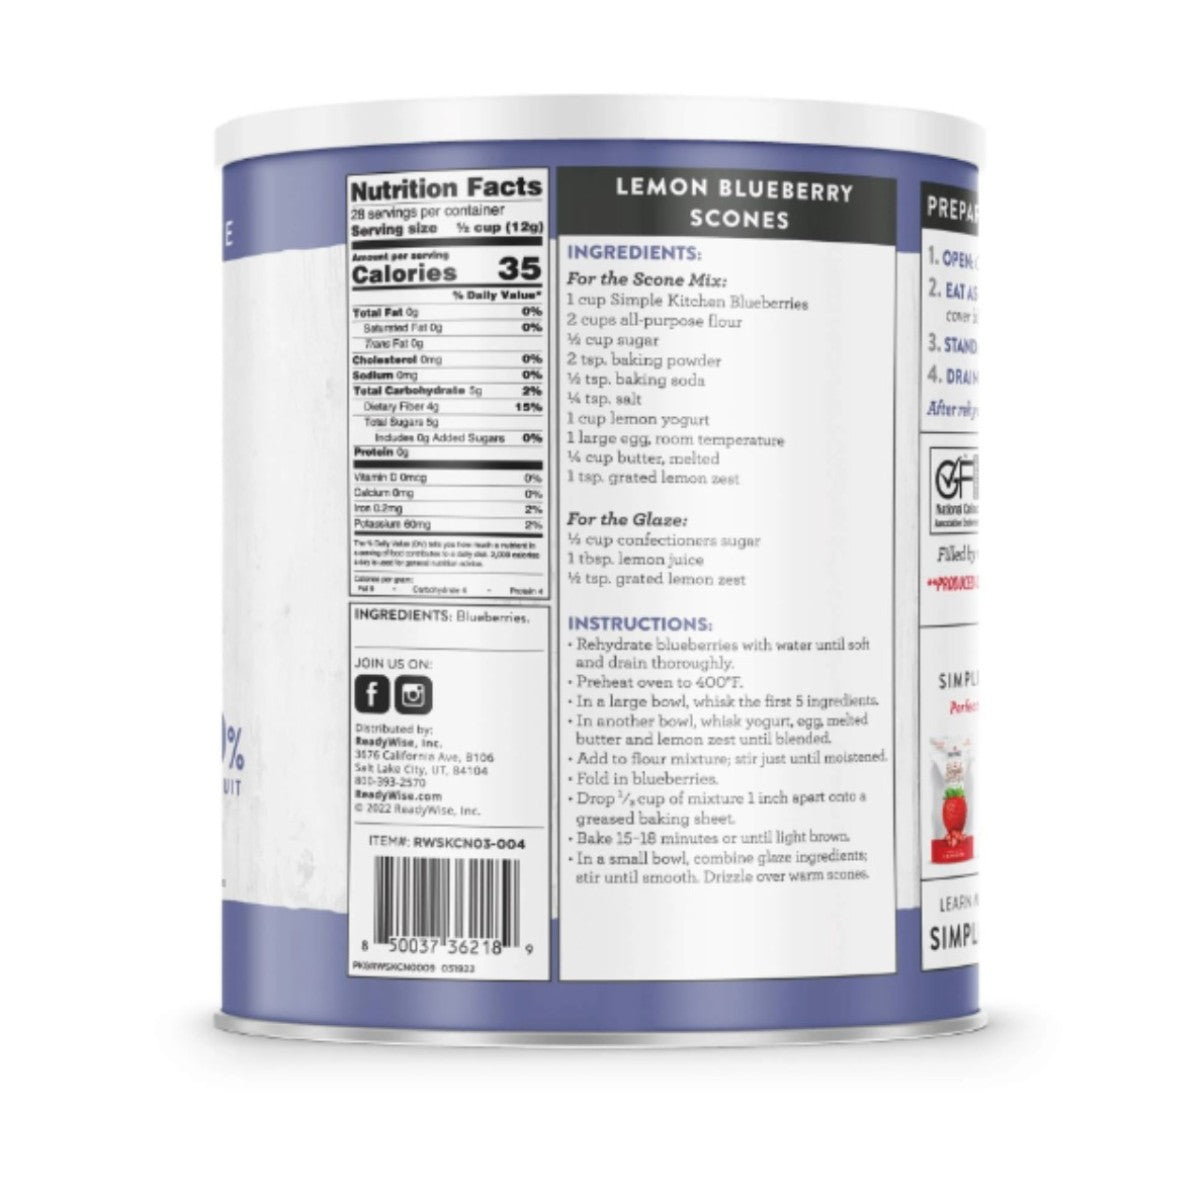 ReadyWise Simple Kitchen FD Whole Blueberries 28 Serving Can